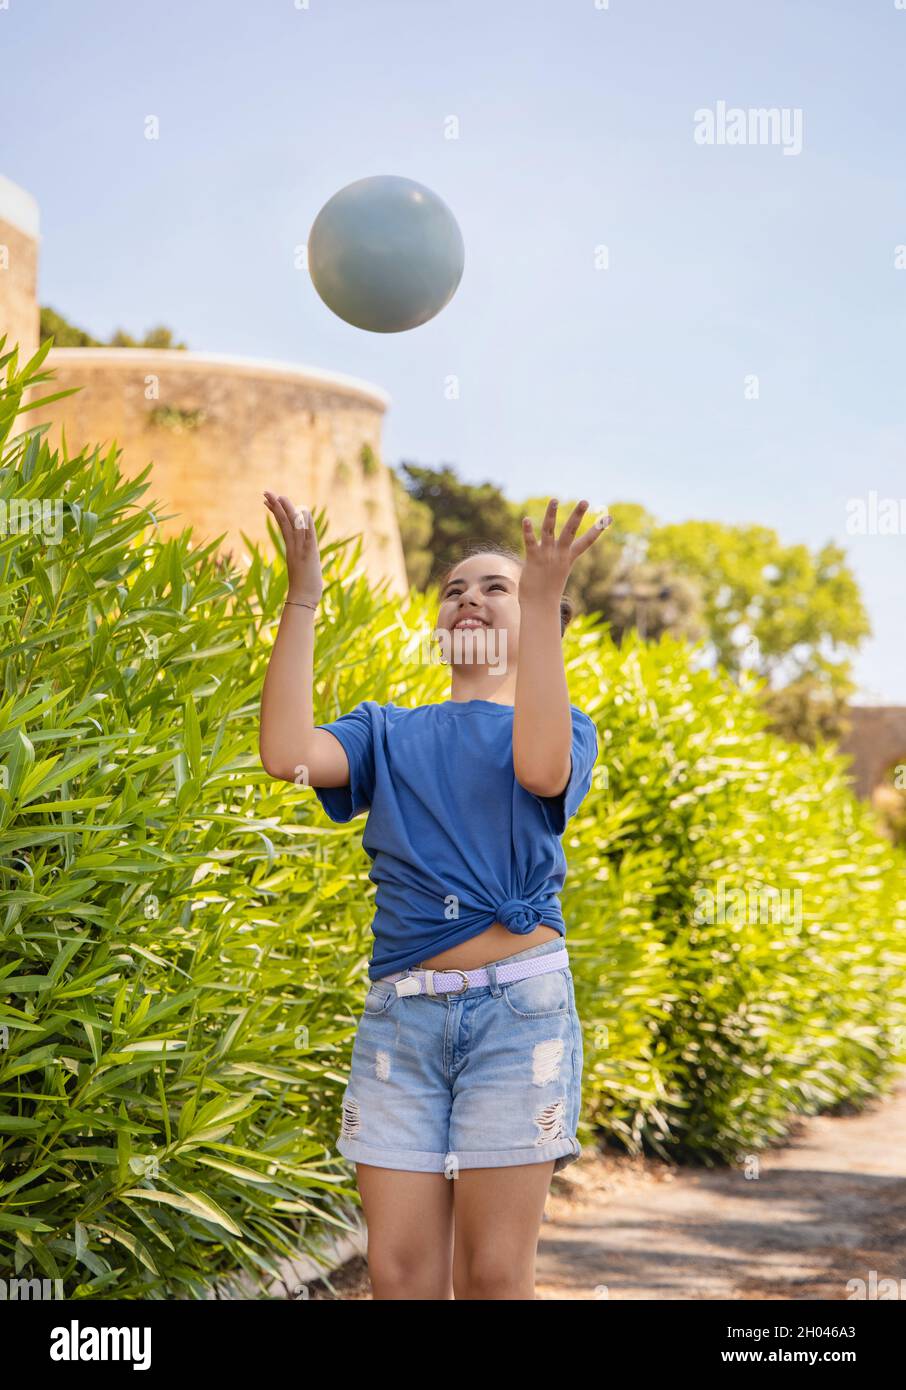 Happy schooler girl in blue t-shirt holding ball outdoors. Cute child doing sports, enjoying playing soccer and having fun in park. Active hobbies, he Stock Photo